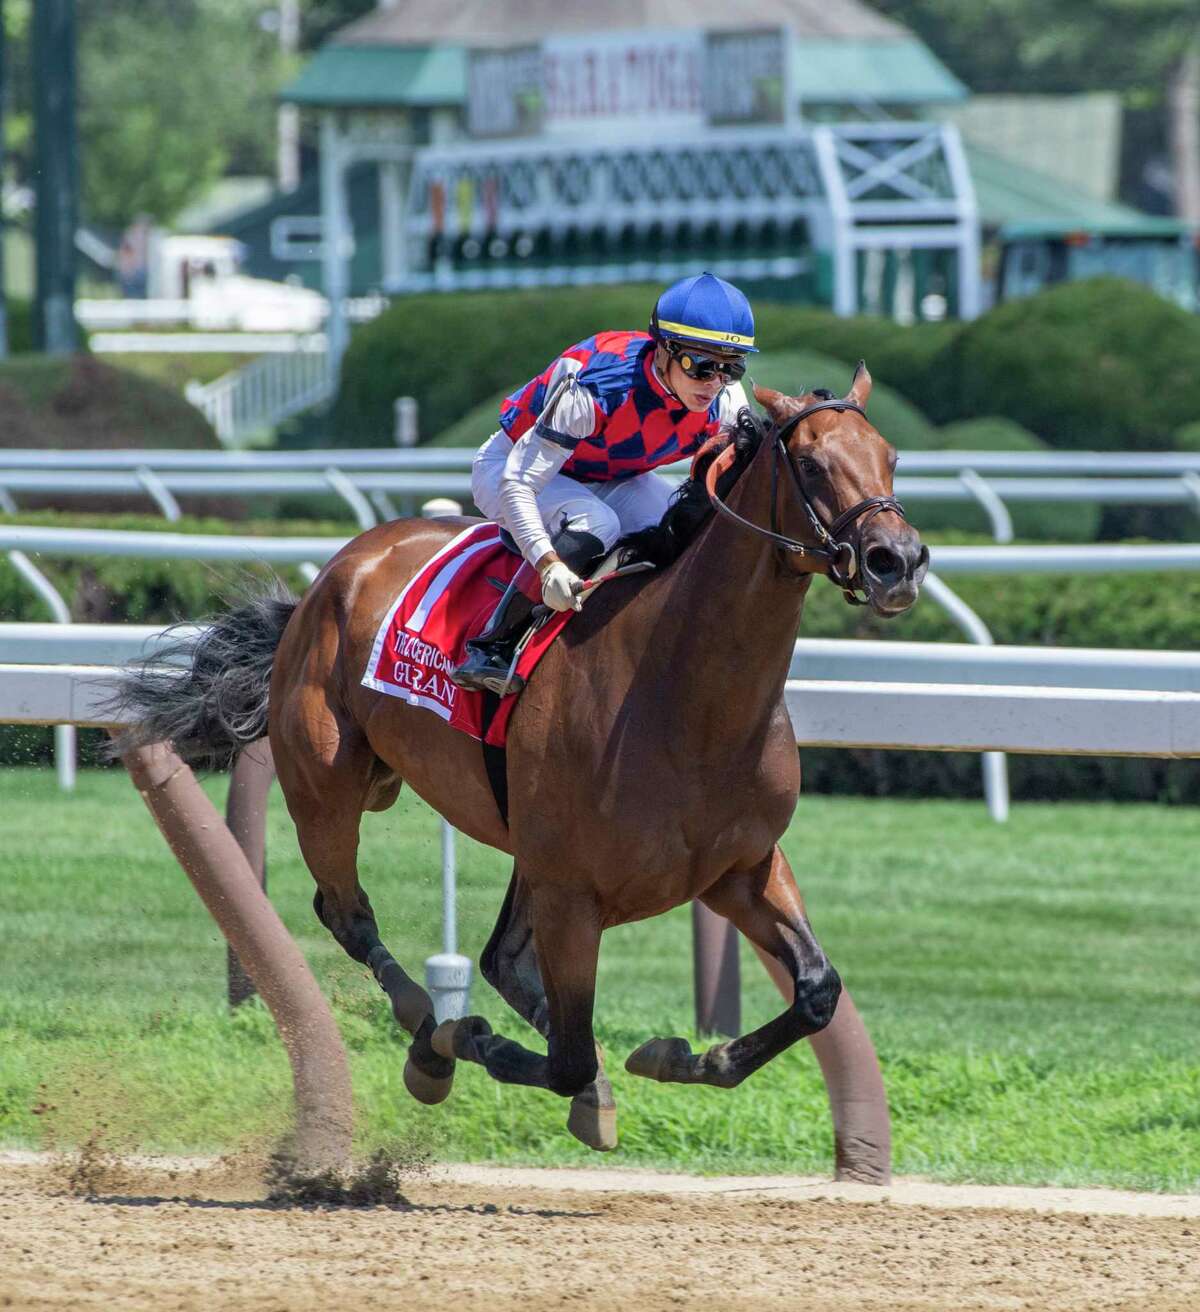 Guarana ridden by Jose Ortiz pulls ahead of the field to win the 103rd running of the Coaching Club American Oaks Sunday July 21, 2019 at the Saratoga Race Course in Saratoga Springs, N.Y. Special to the Times Union by Skip Dickstein